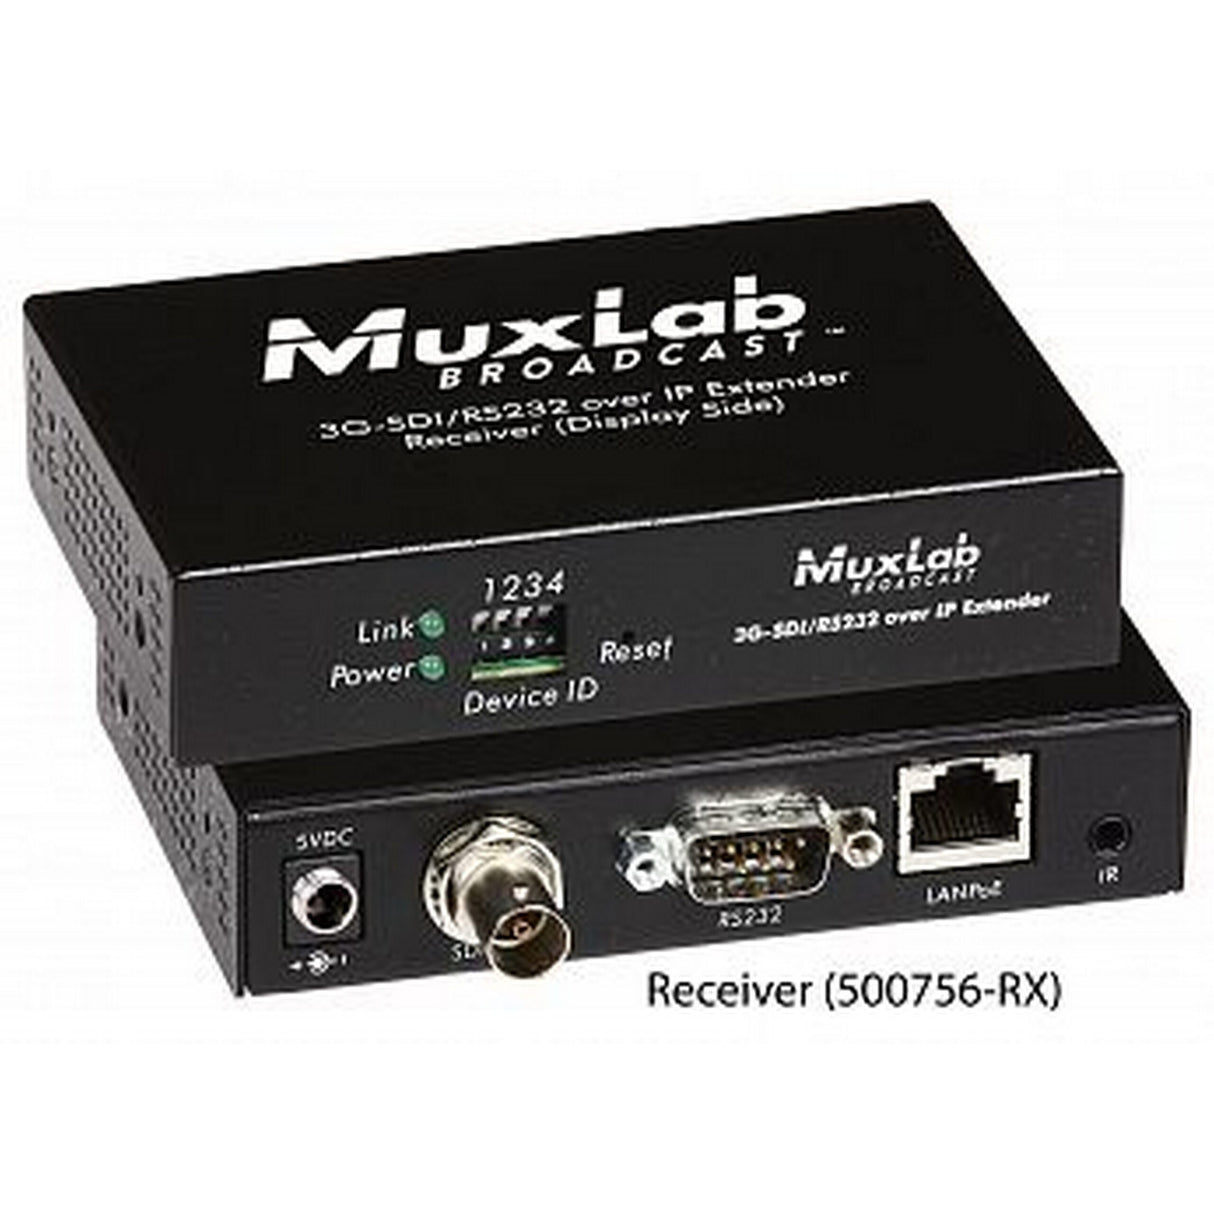 MuxLab 500756-RX 3G-SDI Over IP Receiver with PoE